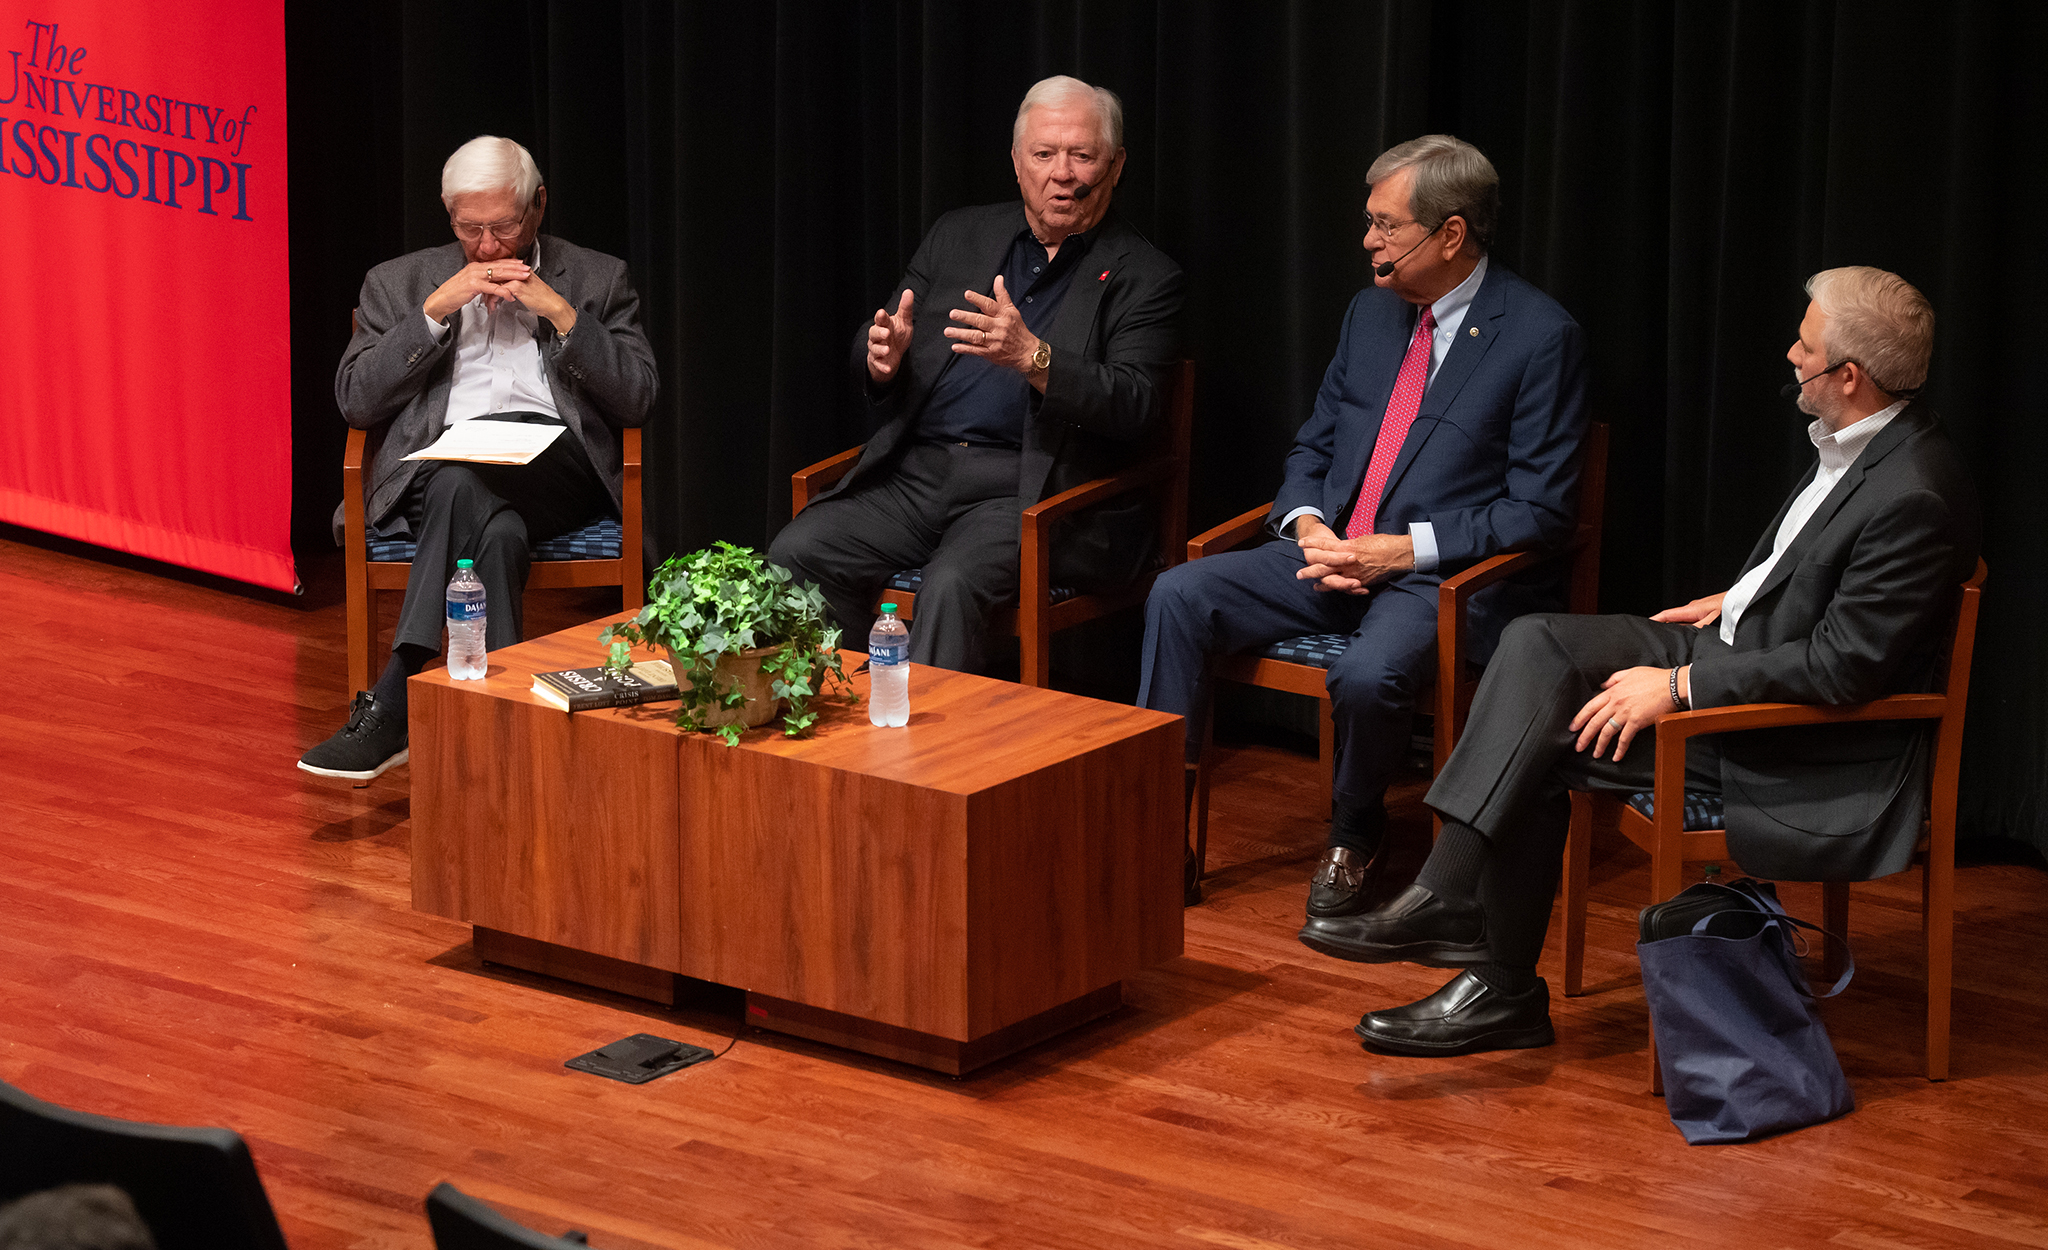 Former Gov. Haley Barbour (second from left) and retired U.S. Sen. Trent Lott (third from left) discuss the importance of bipartisan cooperation to solve problems during the ‘Moving Mississippi Forward’ public discussion at Ole Miss. Co-sponsored by the university’s Lott Leadership Institute and Barbour Center for Manufacturing Excellence, the event also featured moderators Bill Gotshall (left), Lott Institute executive director, and Scott Kilpatrick, CME director. Photo by Kevin Bain/Ole Miss Digital Imaging Services